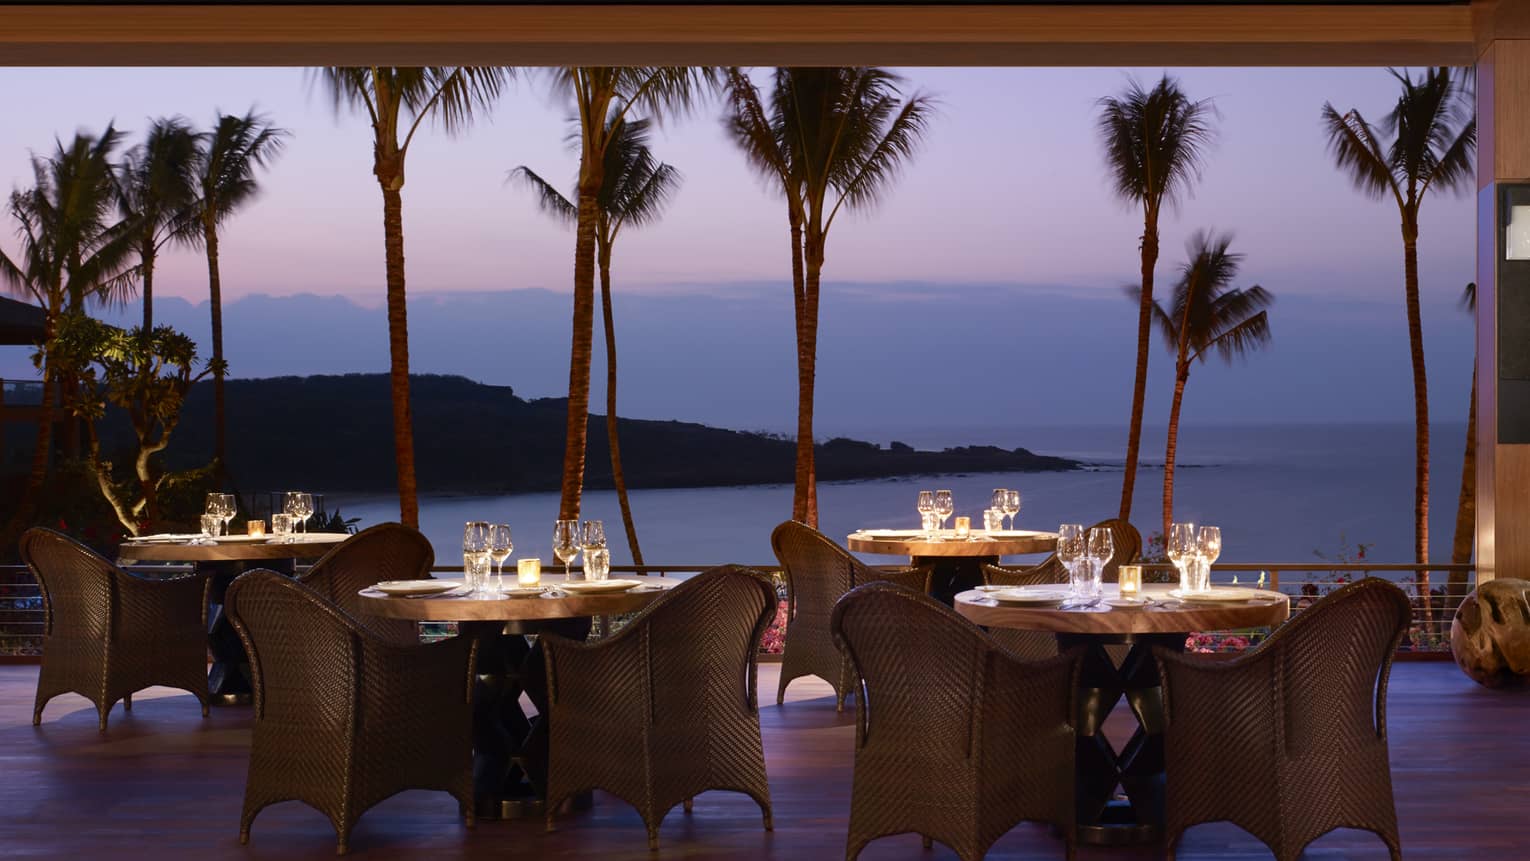 Wicker dining chairs around patio tables overlooking beach on One Forty patio at night